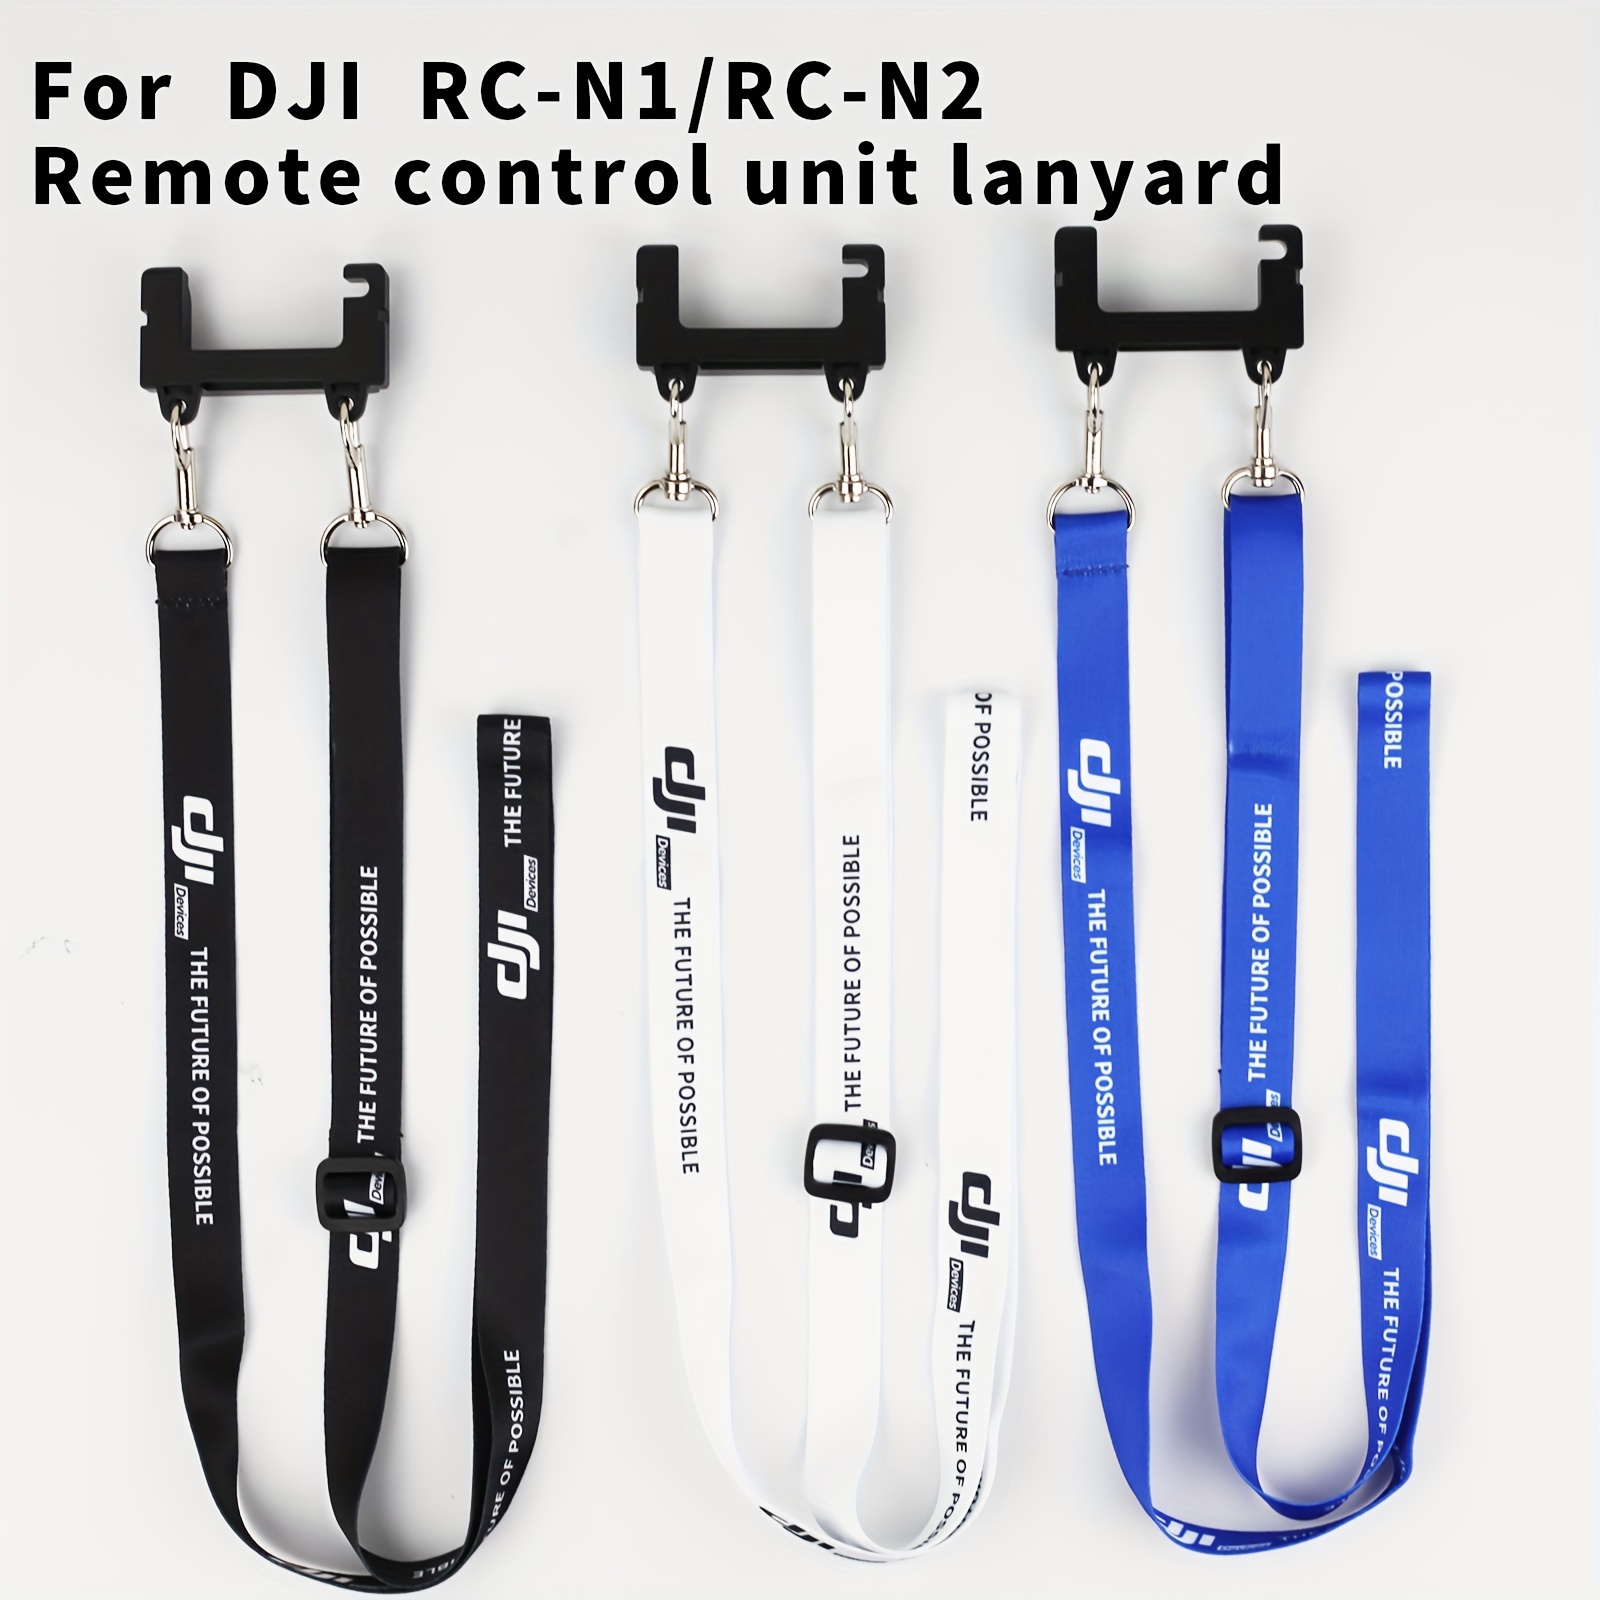 

Suitable For Dji Mini 2/mini 2se/air 2/air 2s And Other Remote Controllers Without Screens, Such As Dji Rc-n1 N2 Remote Controller Strap Accessories